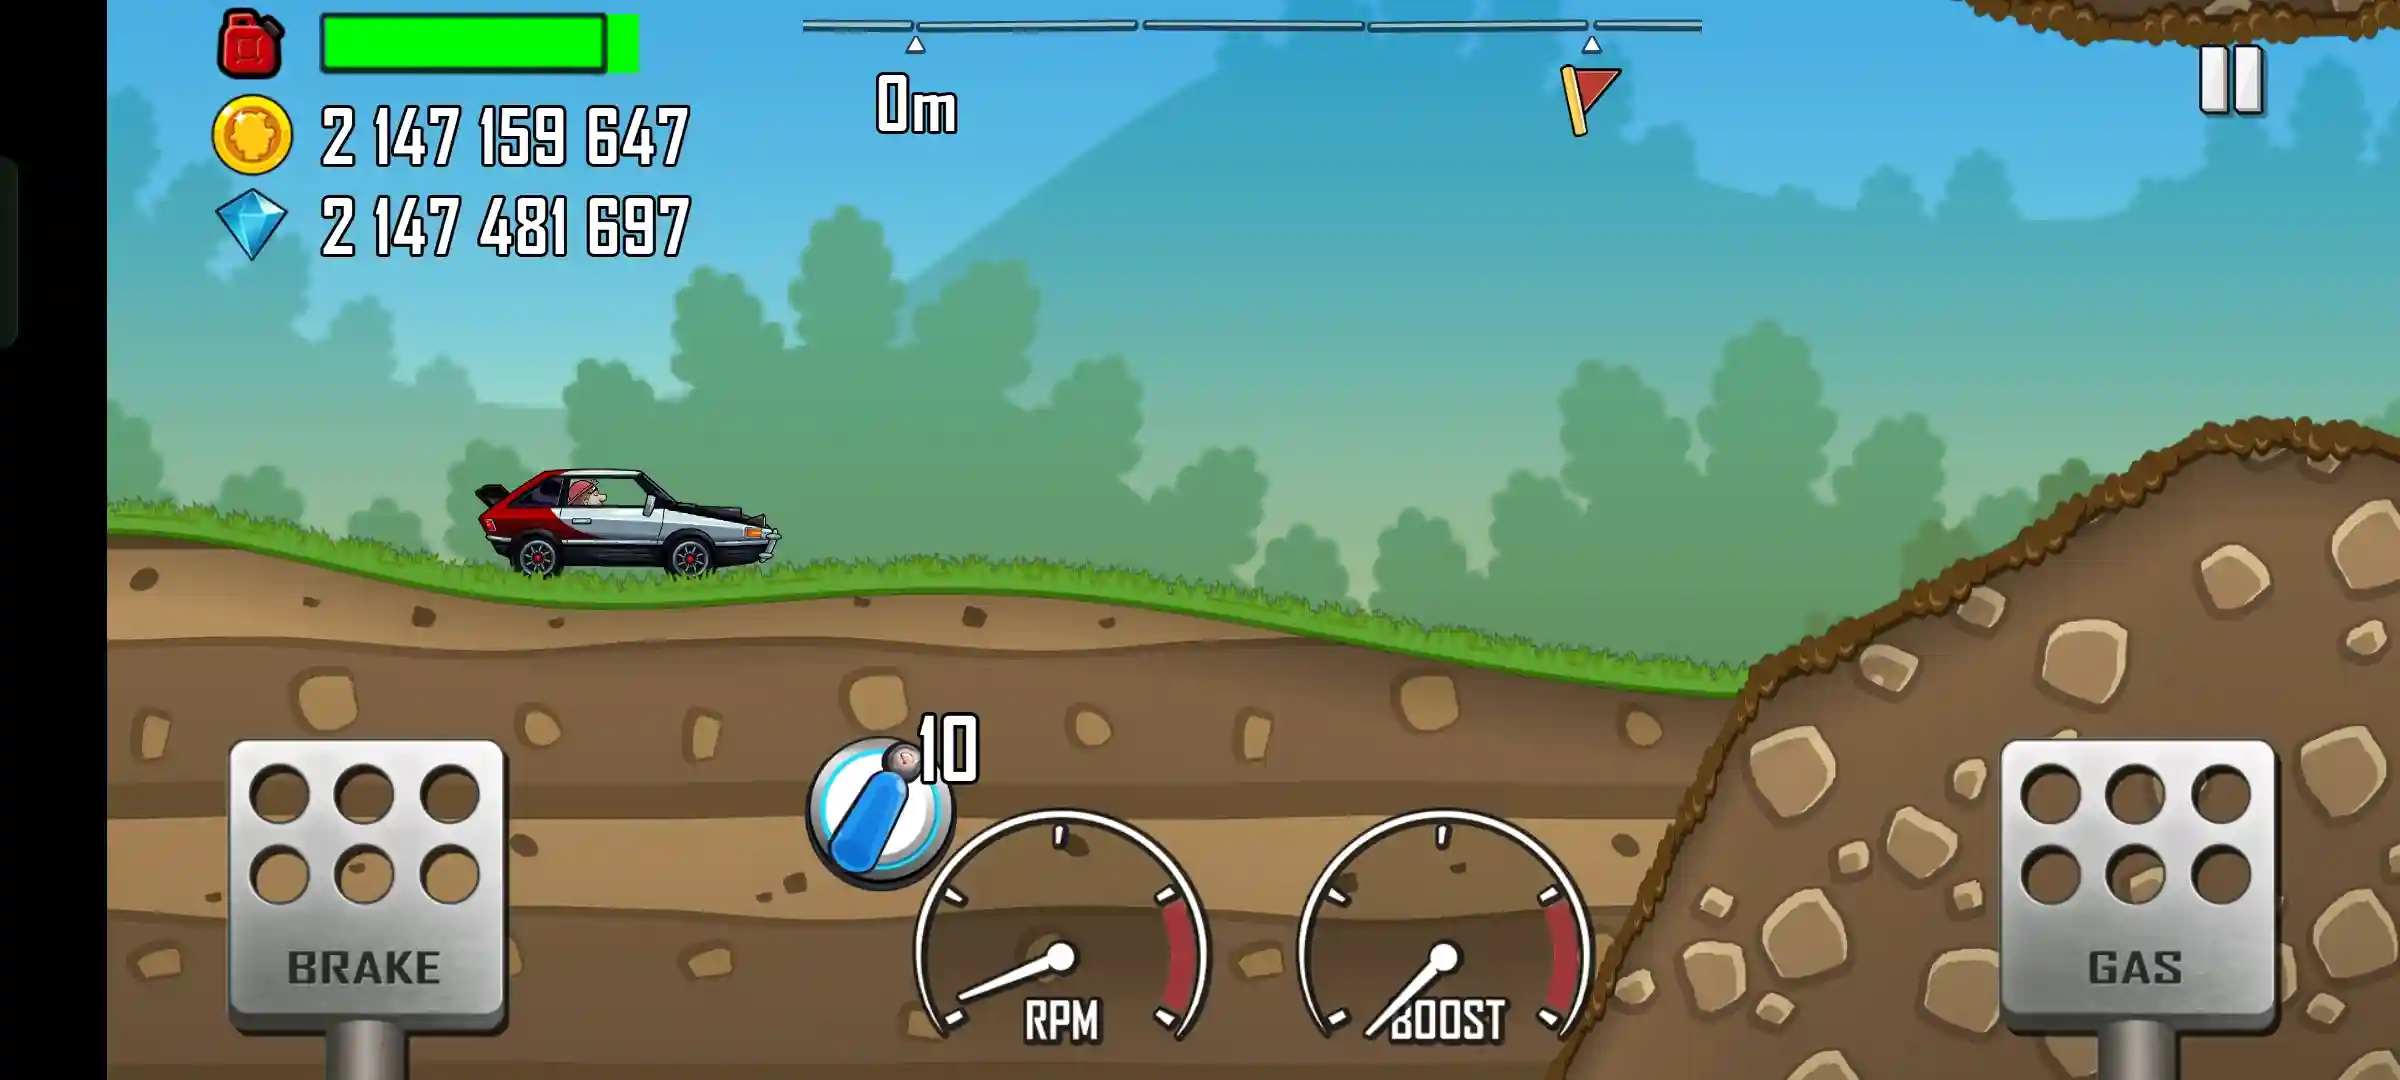 Hill Climb Racing+ Is Out Now For Apple Arcade! • Fingersoft : r